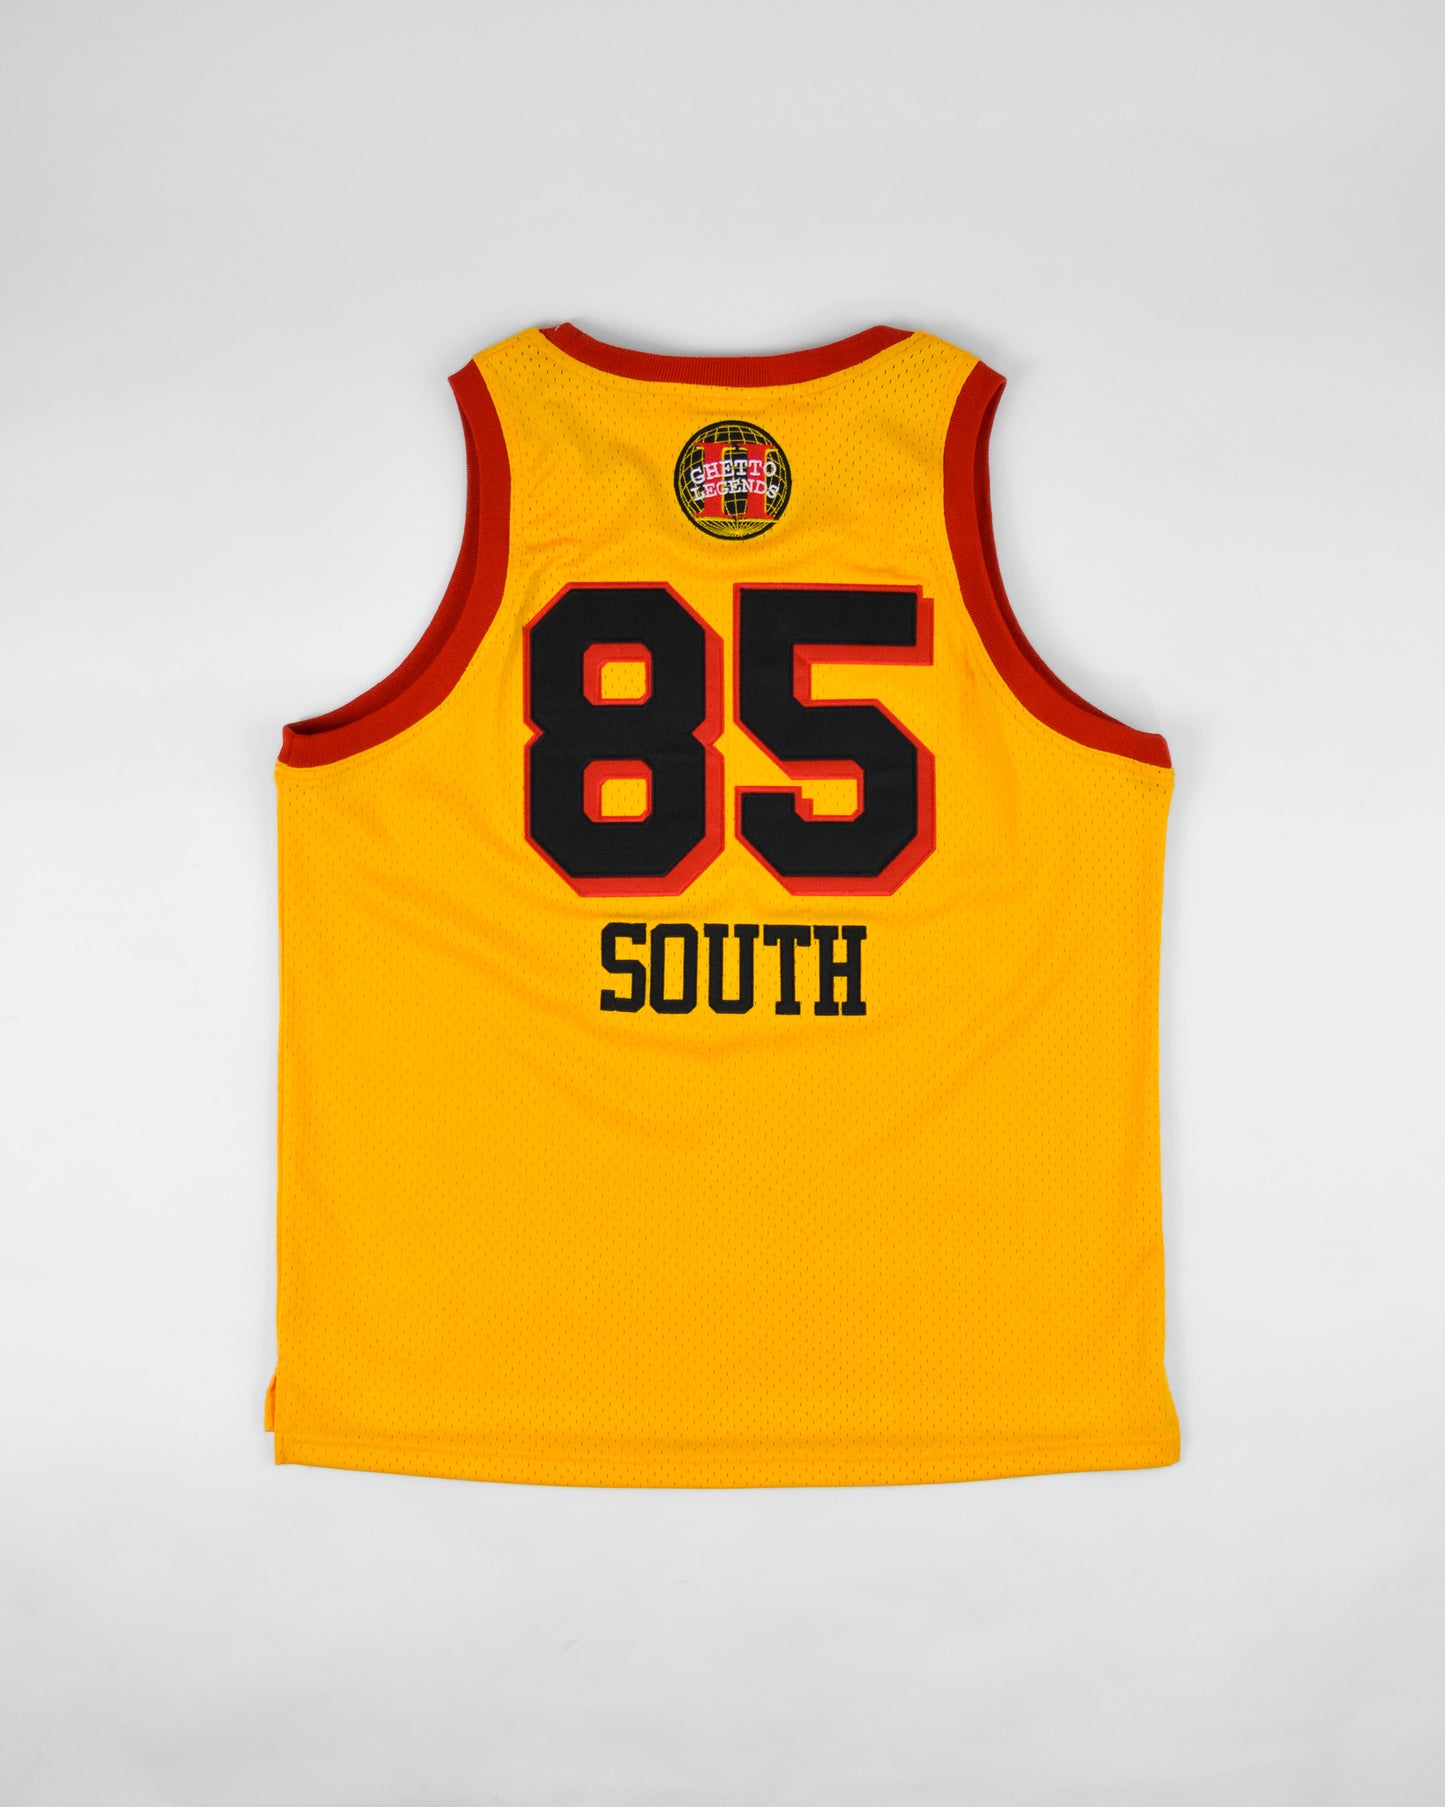 Hawks Inspired South Basketball Jersey